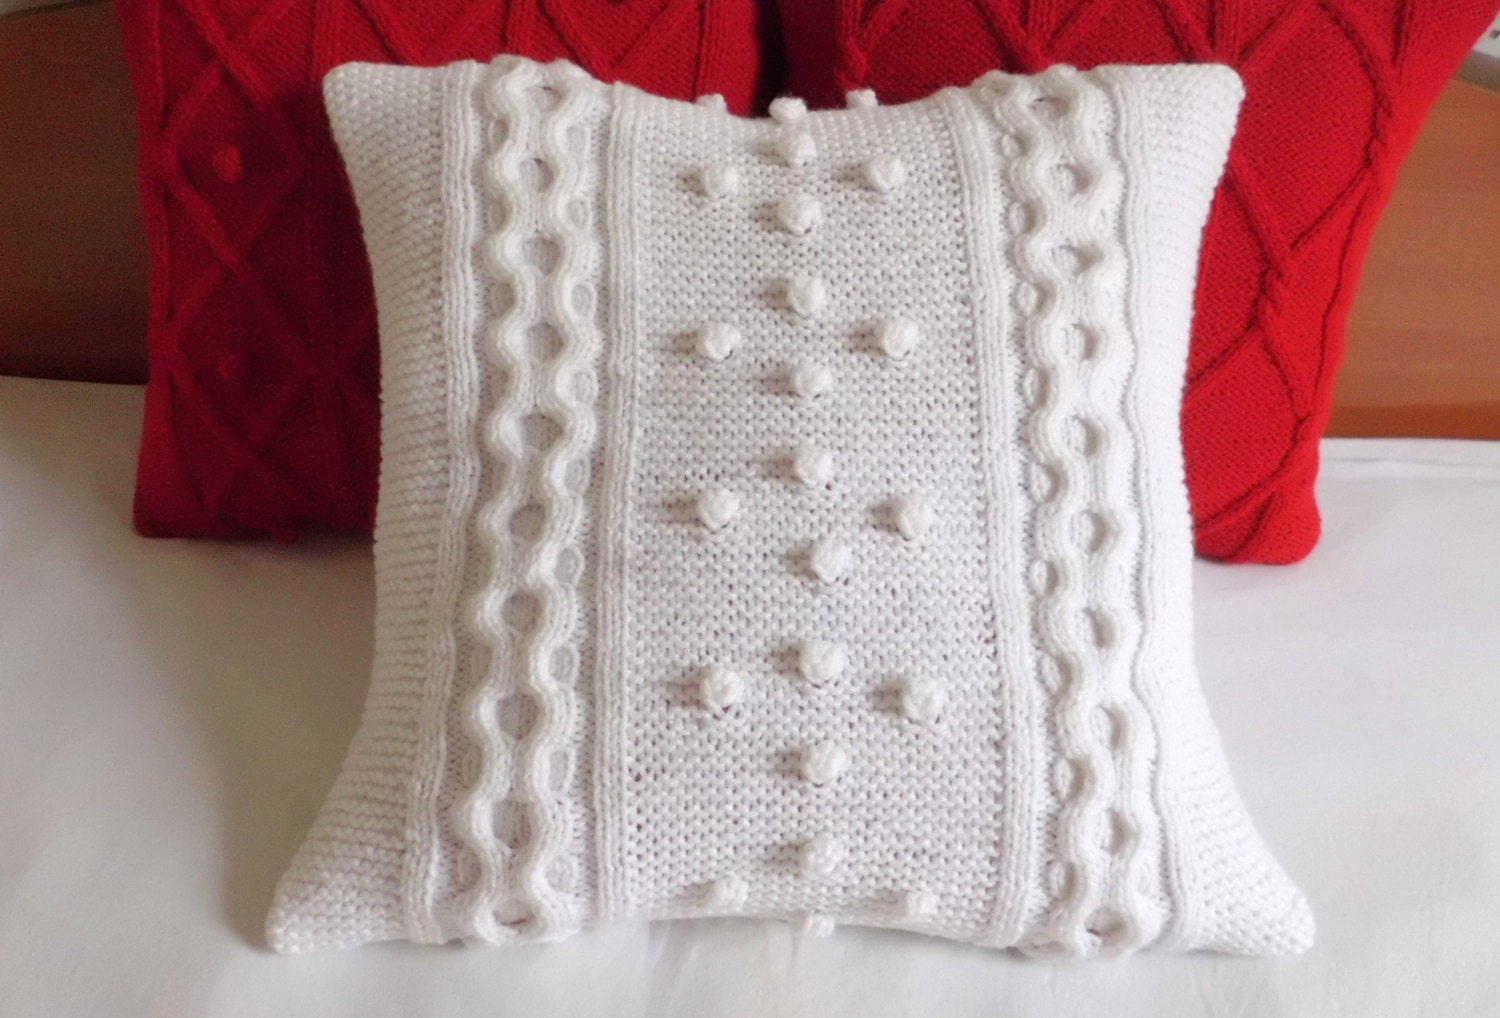 Cable knit cushion cover white, knitted pillow cover, decorative couch pillow, knit throw pillow, home dÃ©cor, 16x16 Christmas pillow sham - Adorablewares